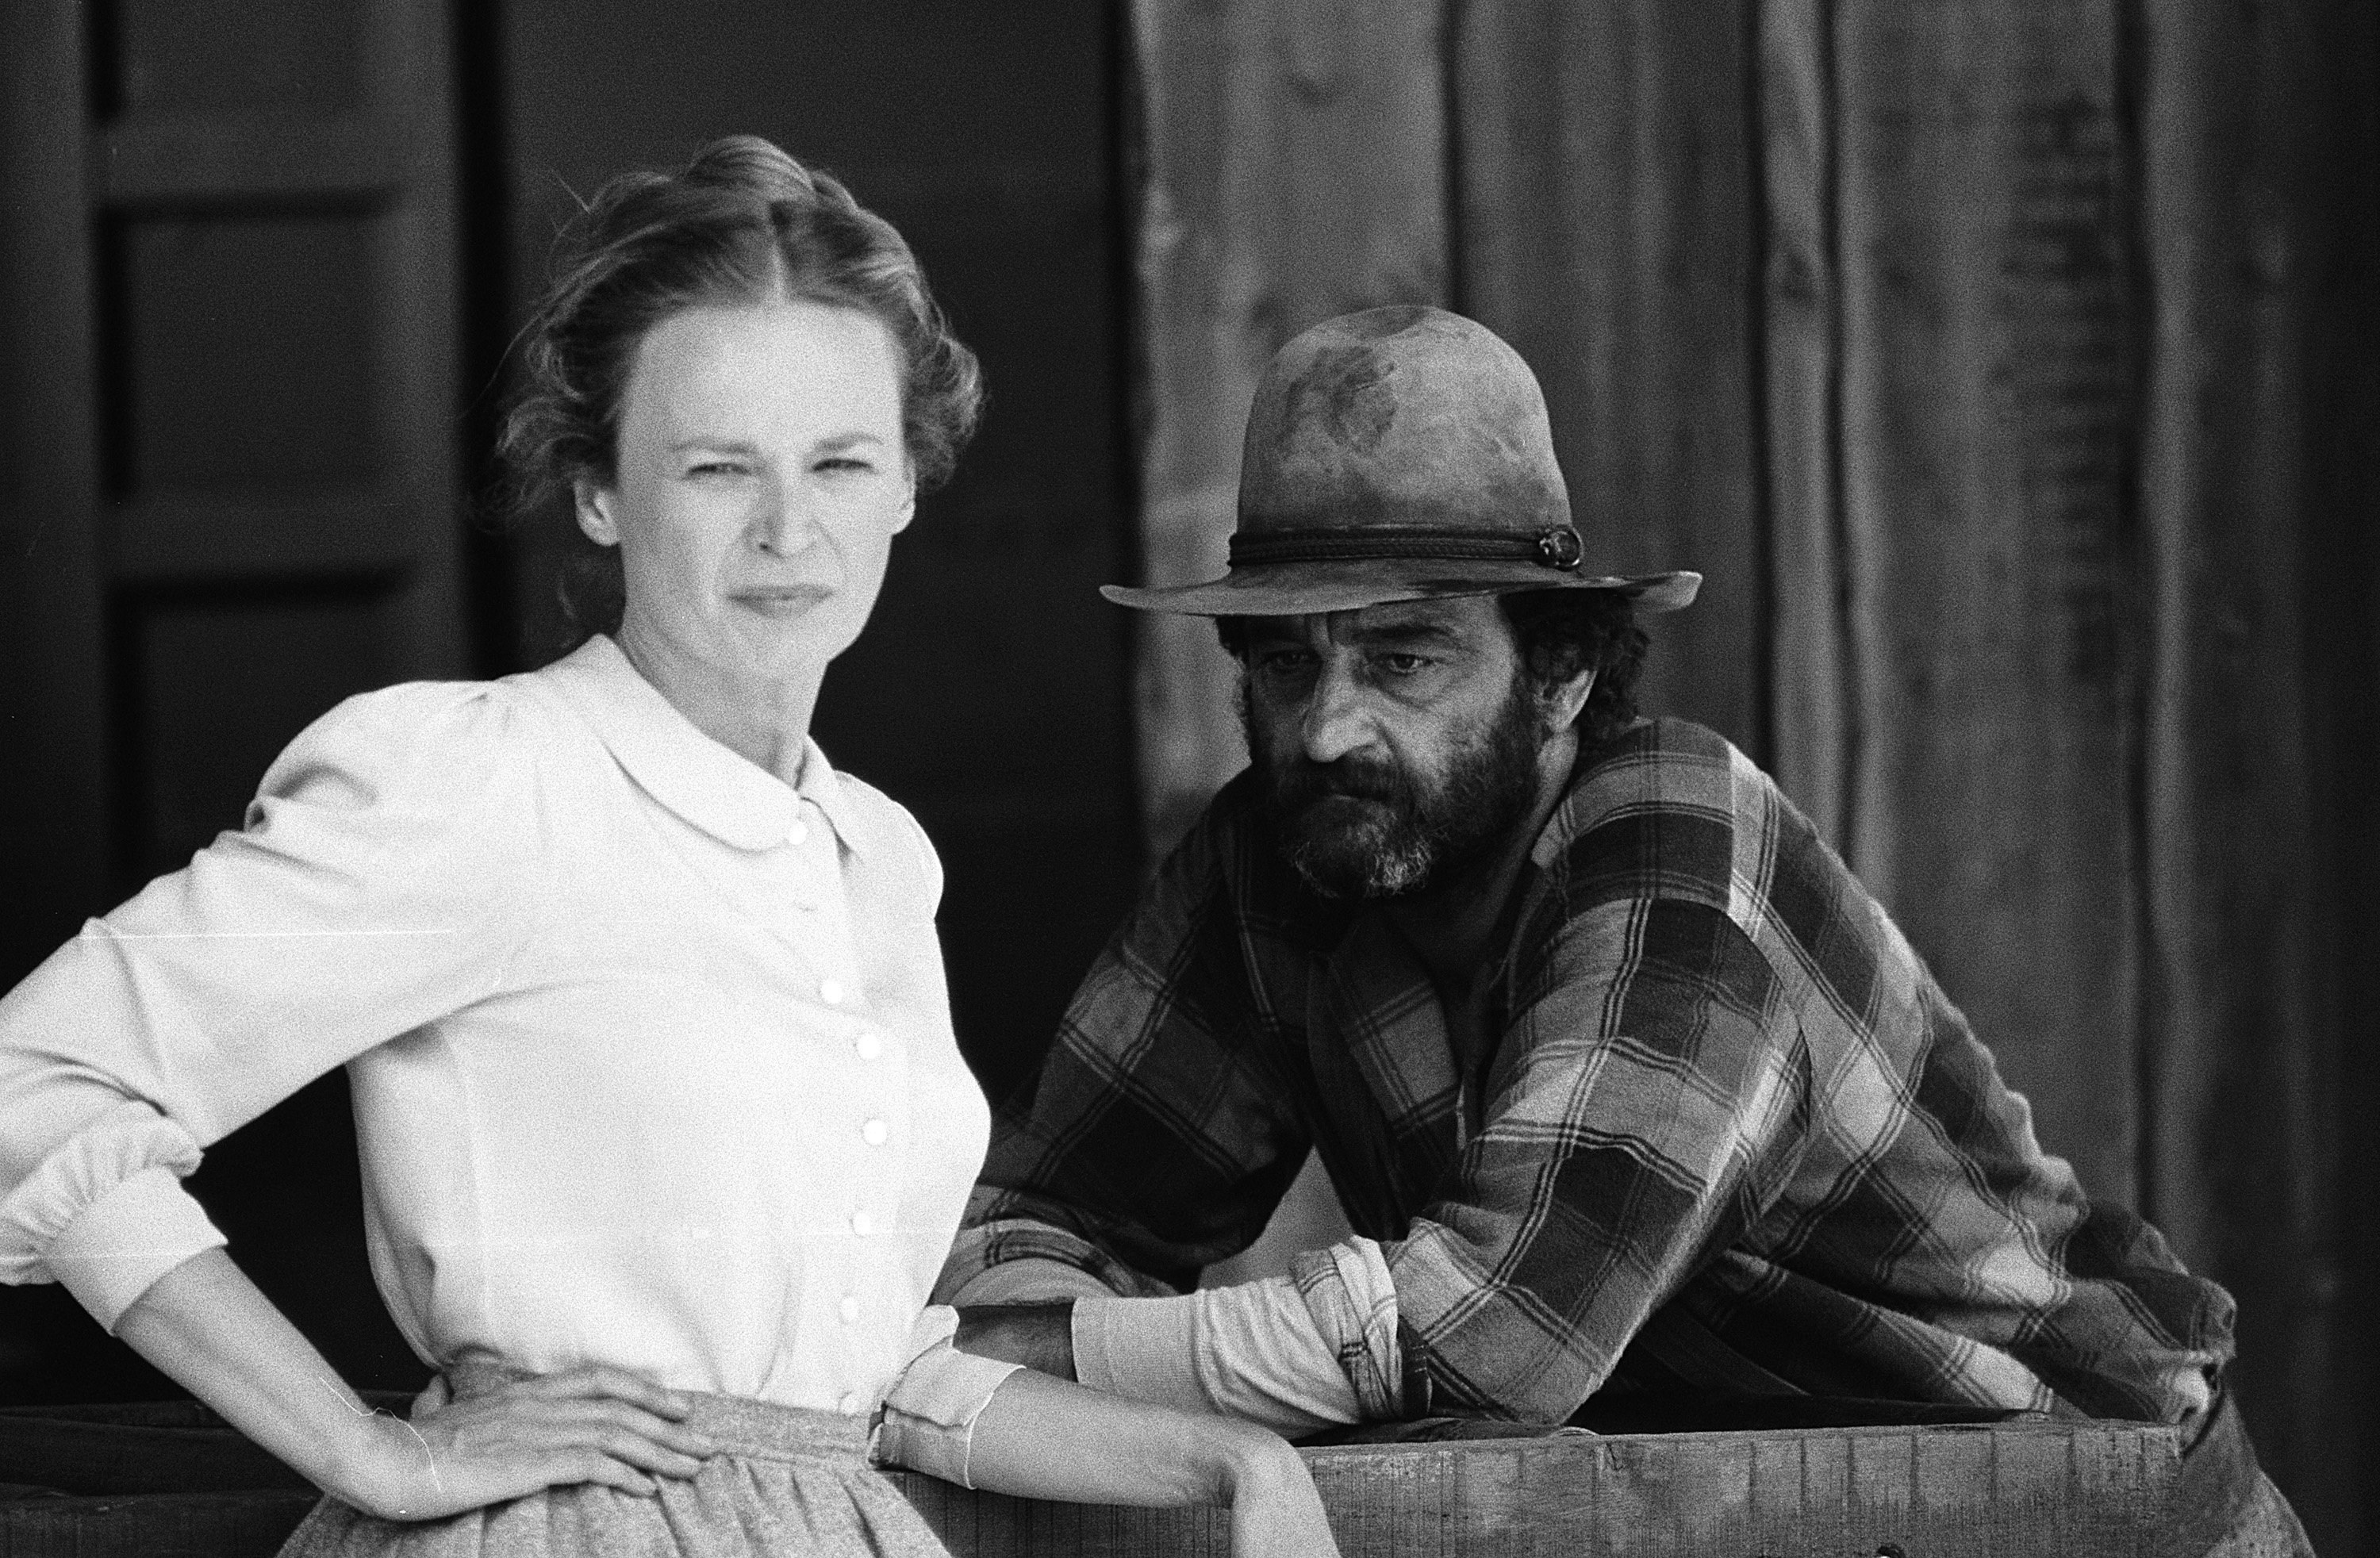 Bonnie Bartlett as Grace Snider and actor Victor French as Isaiah Edwards in the drama series "Little House on the Prairie" on October 2, 1974 | Source: Getty Images